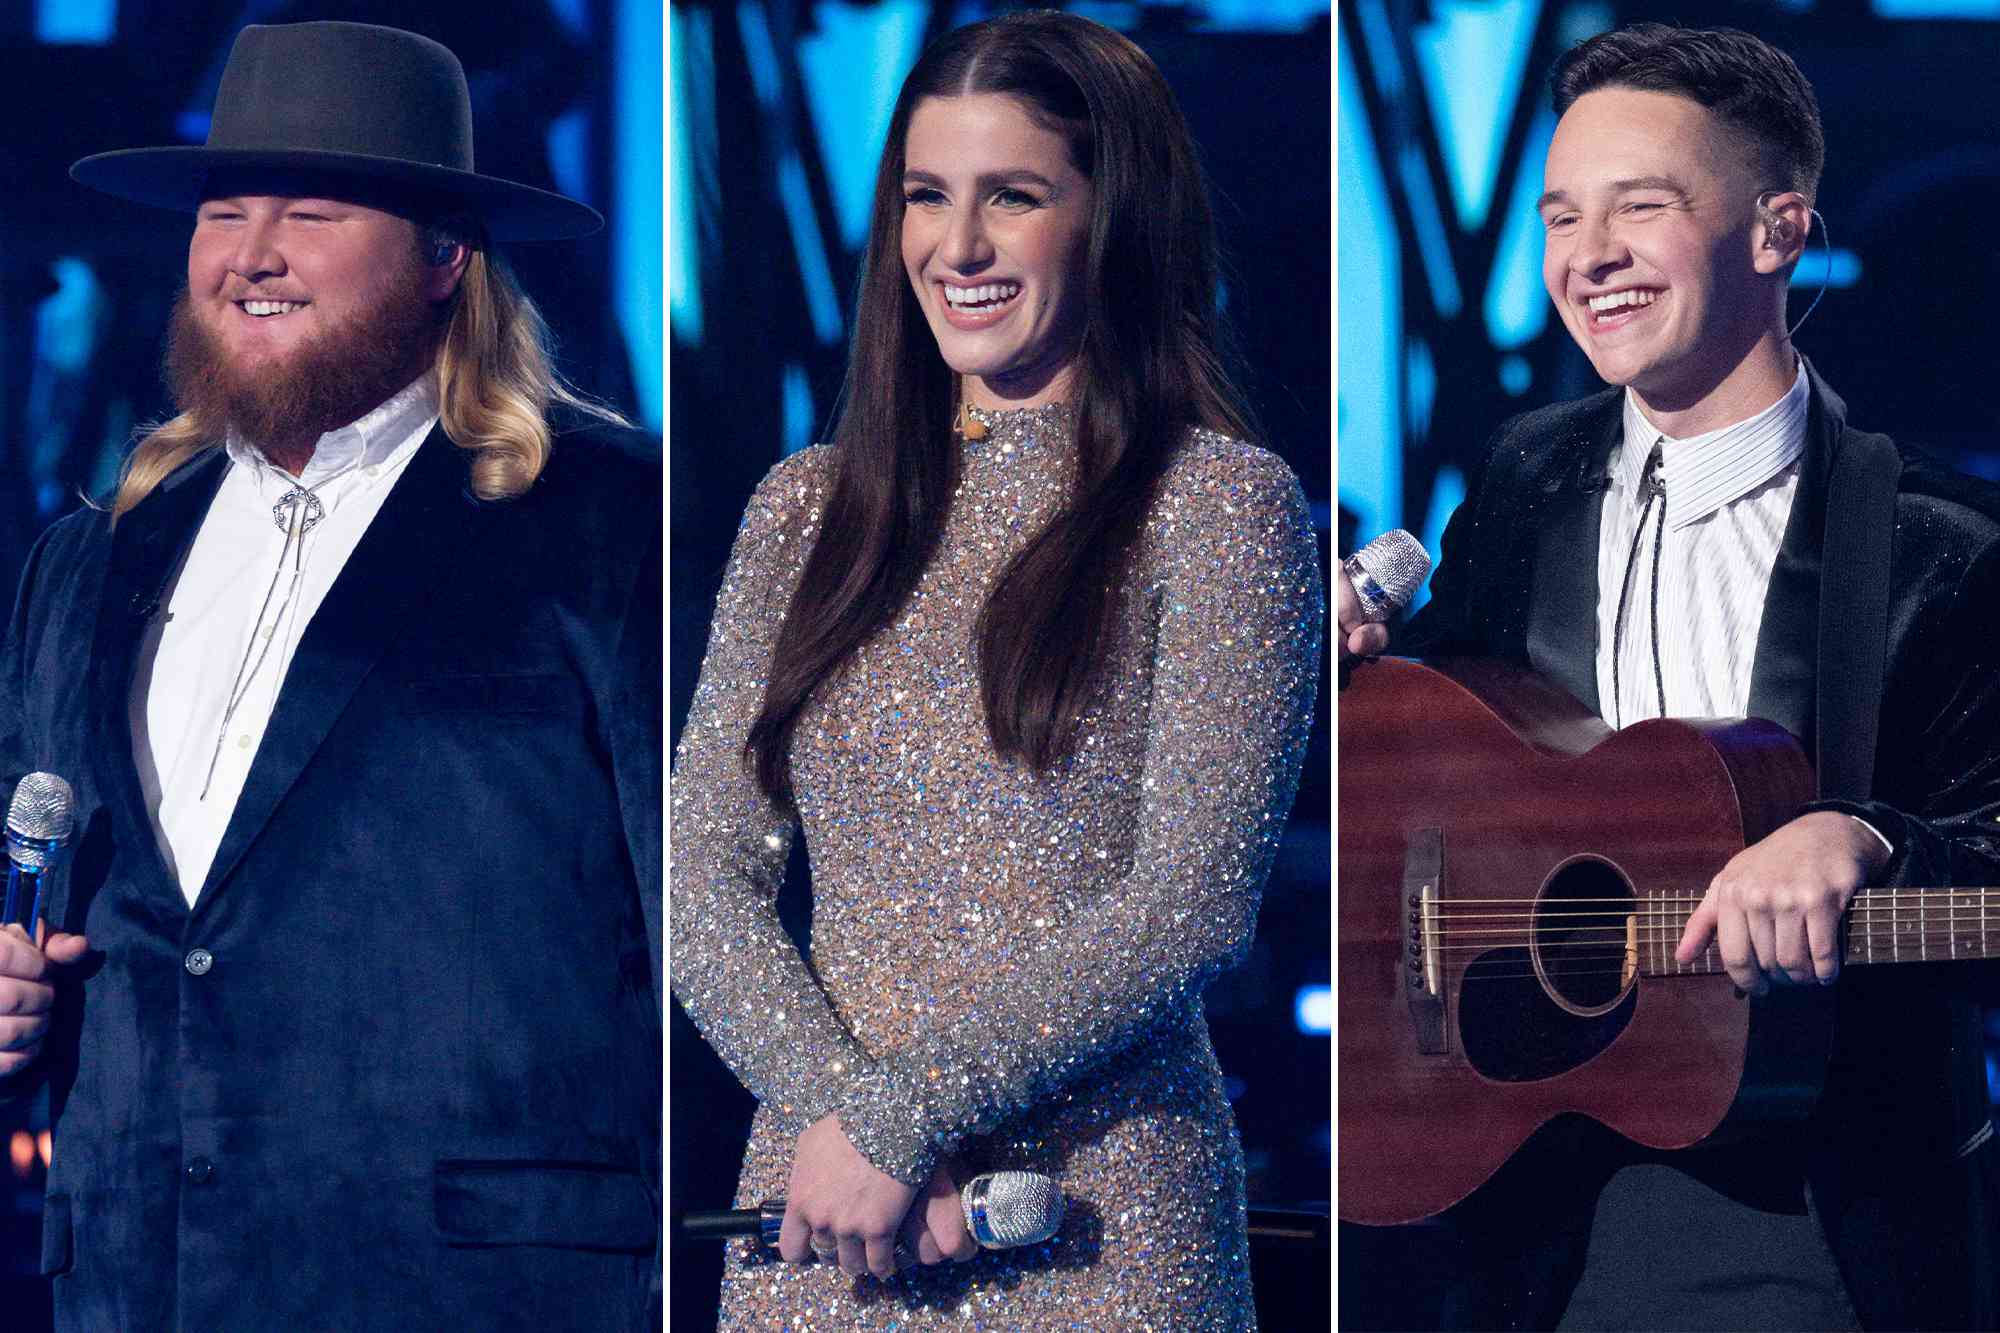 How to Vote for Your Favorite Contestants on “American Idol”